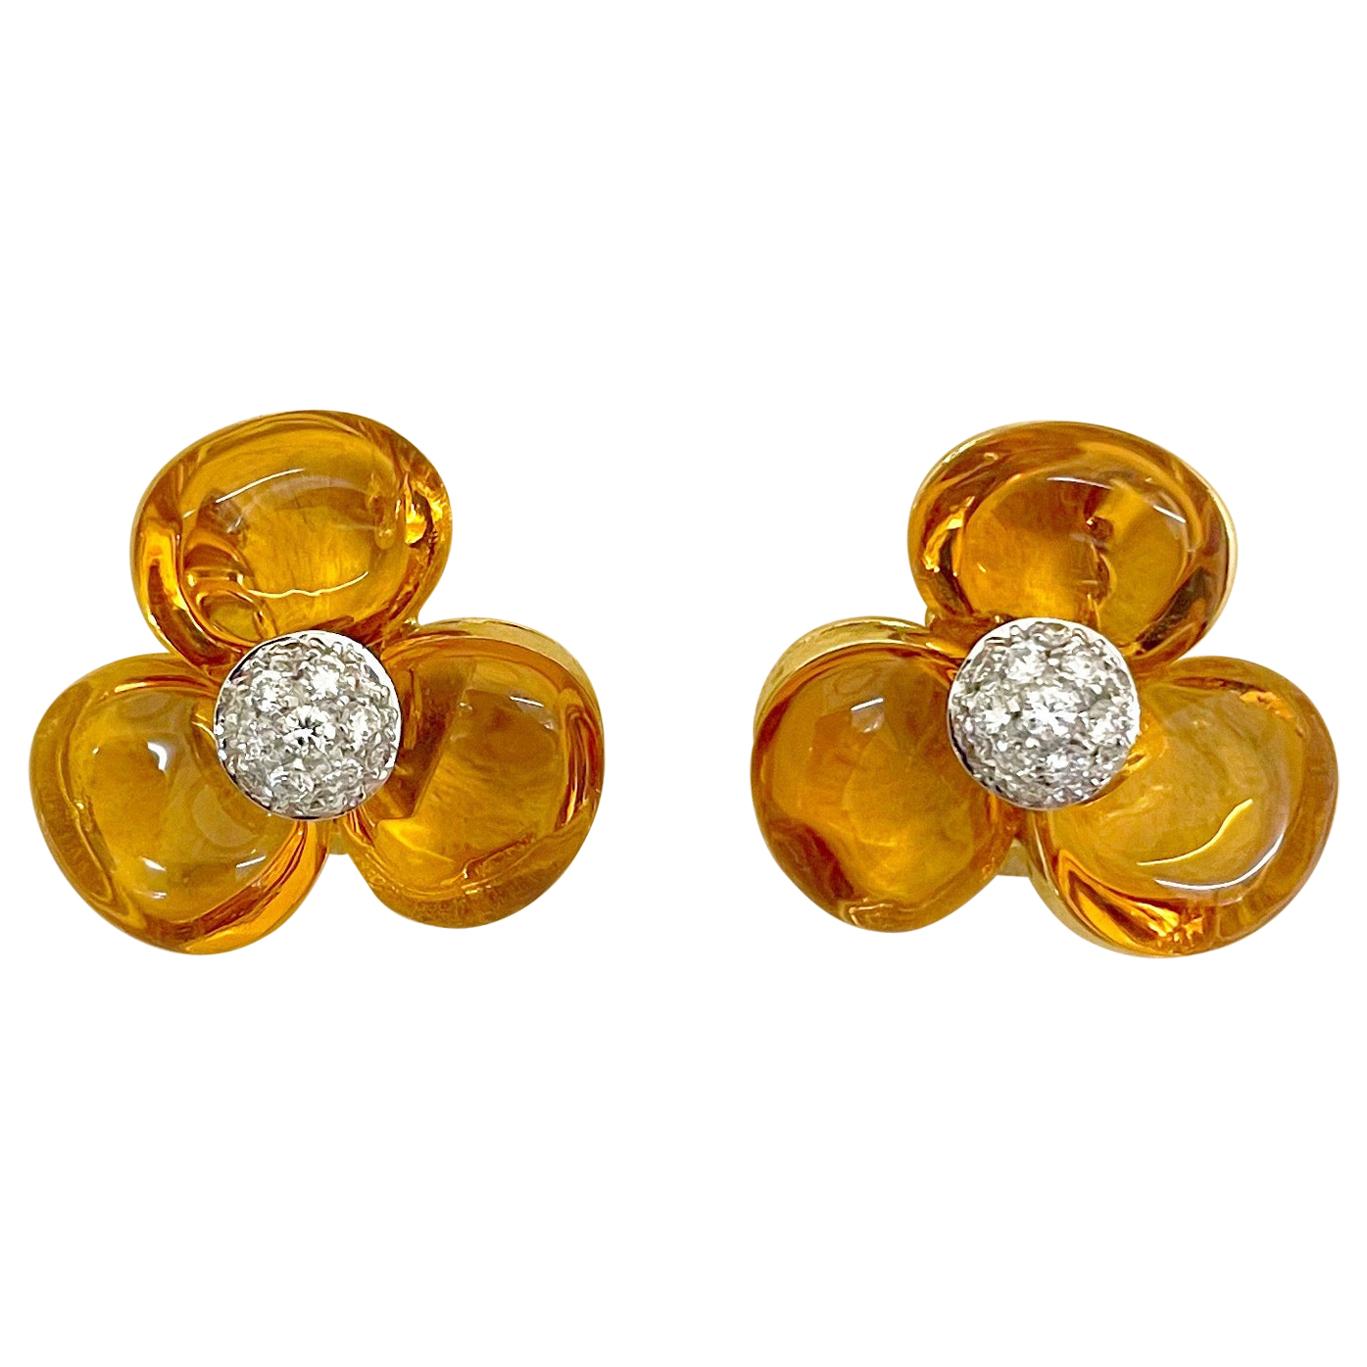 Cellini Cabochon Citrine Flower Earring with Diamonds in 18 Karat Yellow Gold